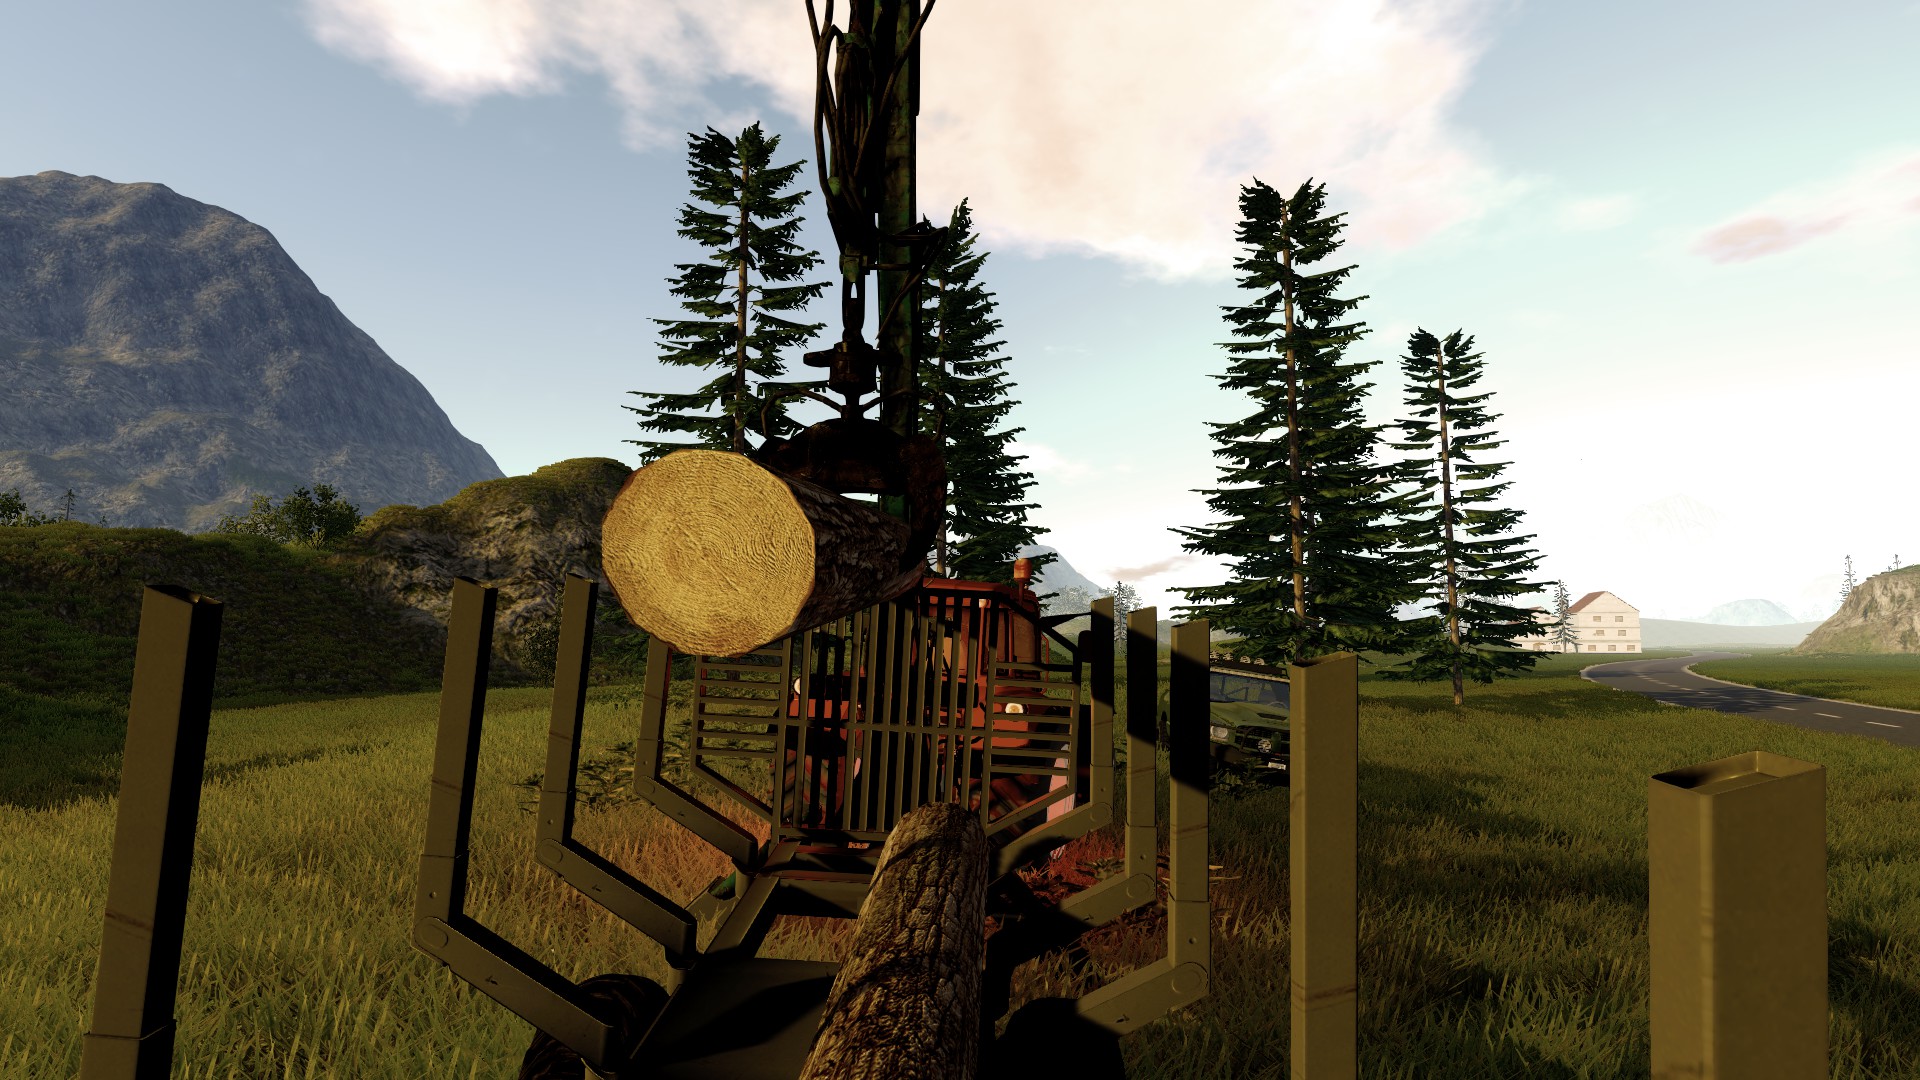 Forestry 2017 - The Simulation screenshot